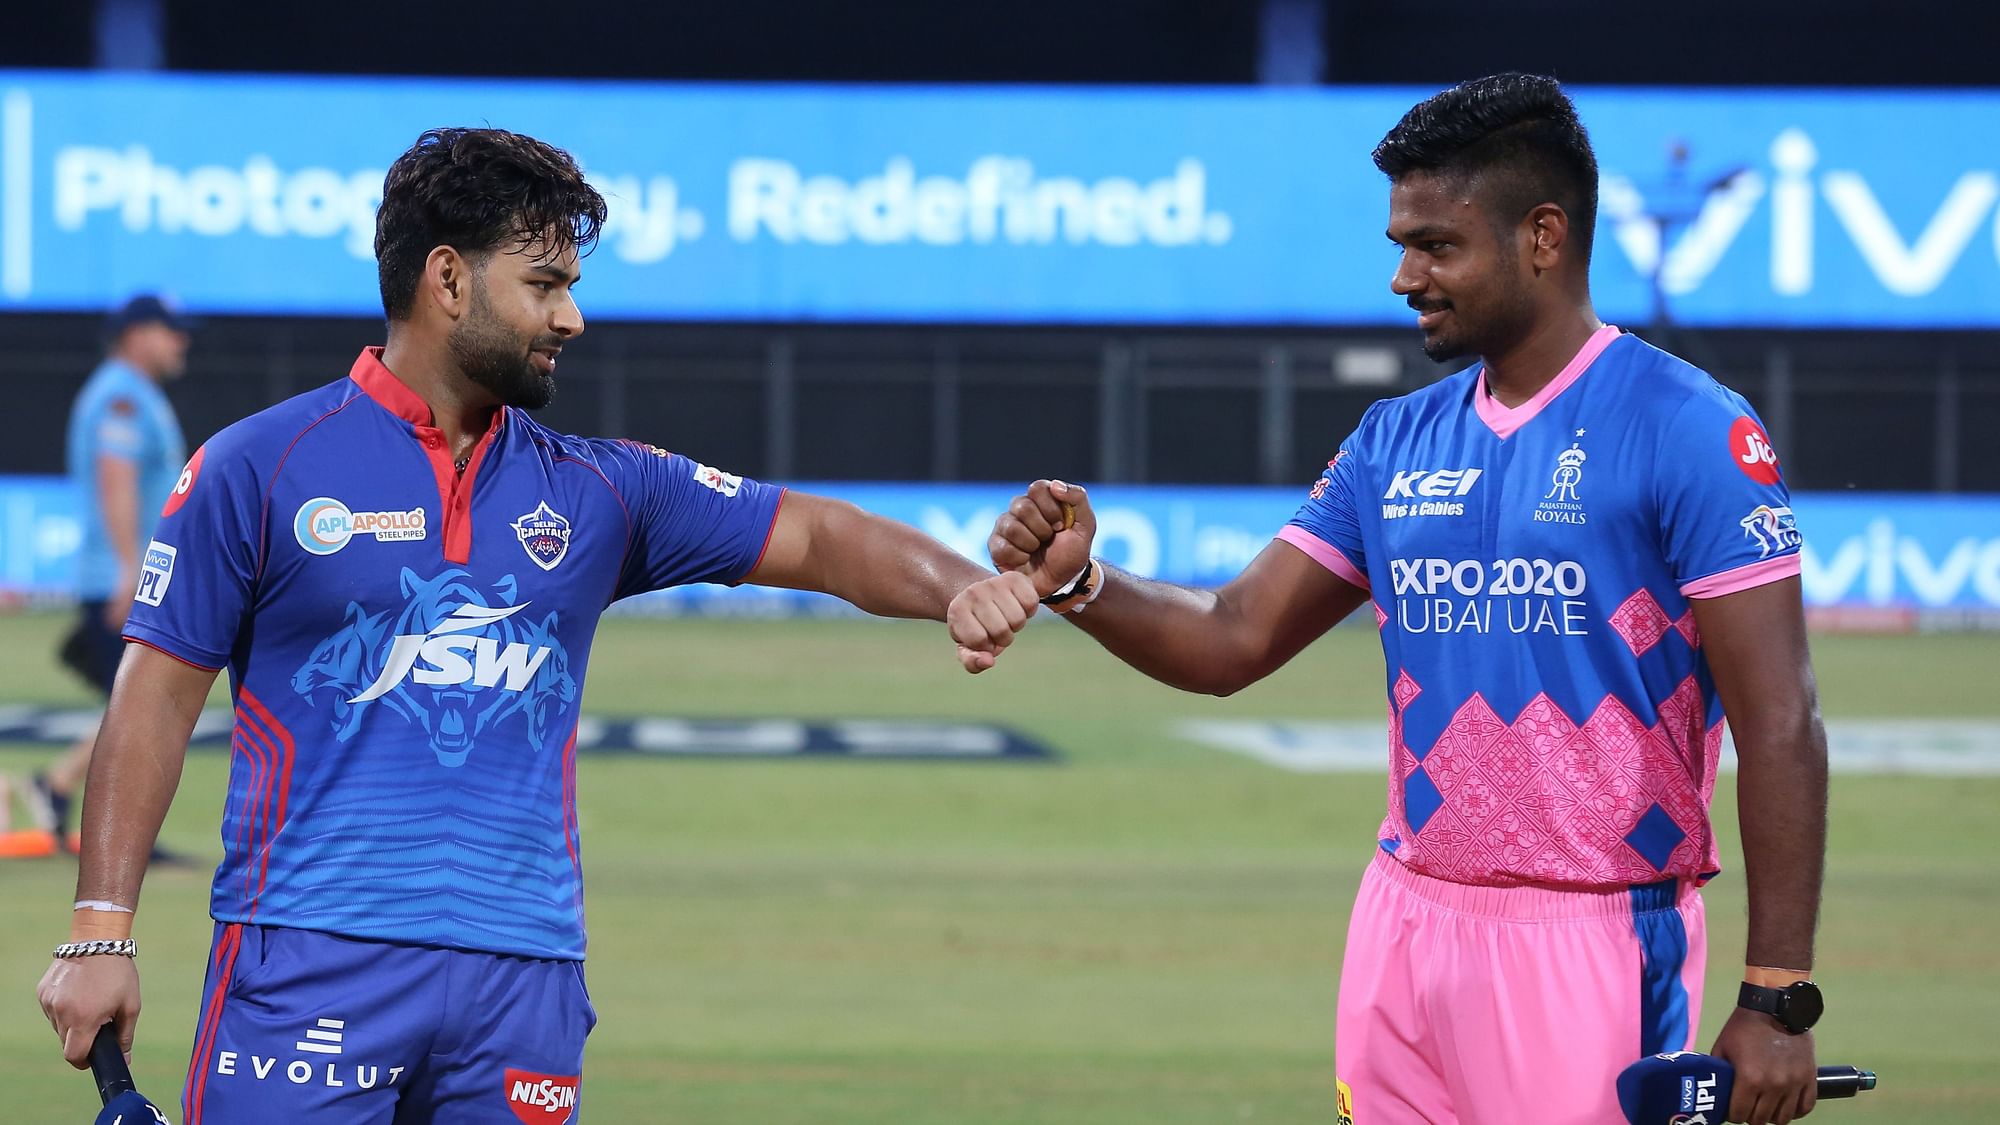 Sanju Samson has won the toss against Rishabh Pant and elected to bowl first in Mumbai.